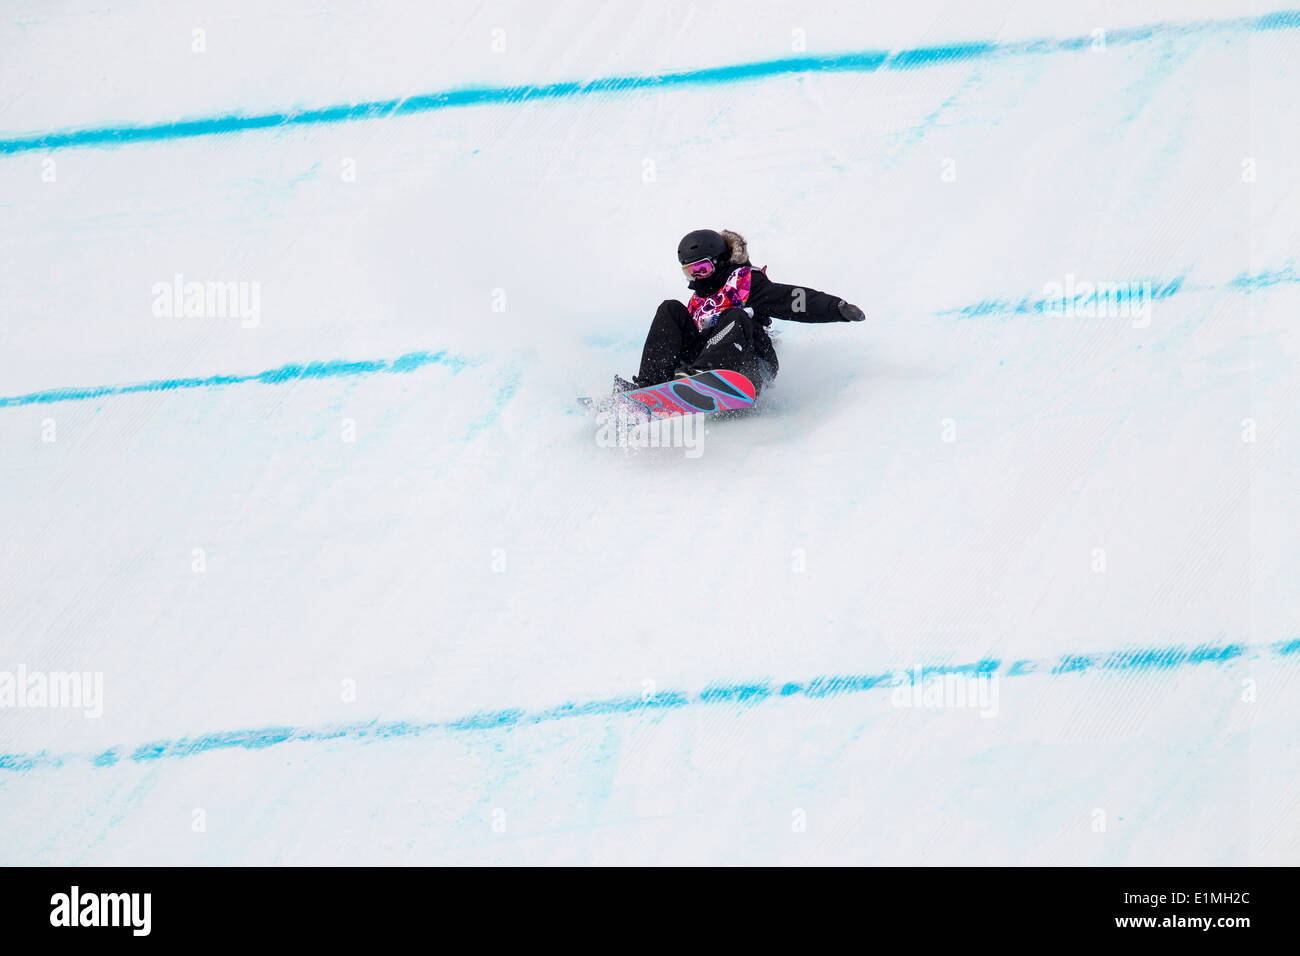 Shelly Gotlieb (NZL) competing in Ladies's Snowboard Slopestyle at the Olympic Winter Games, Sochi 2014 Stock Photo